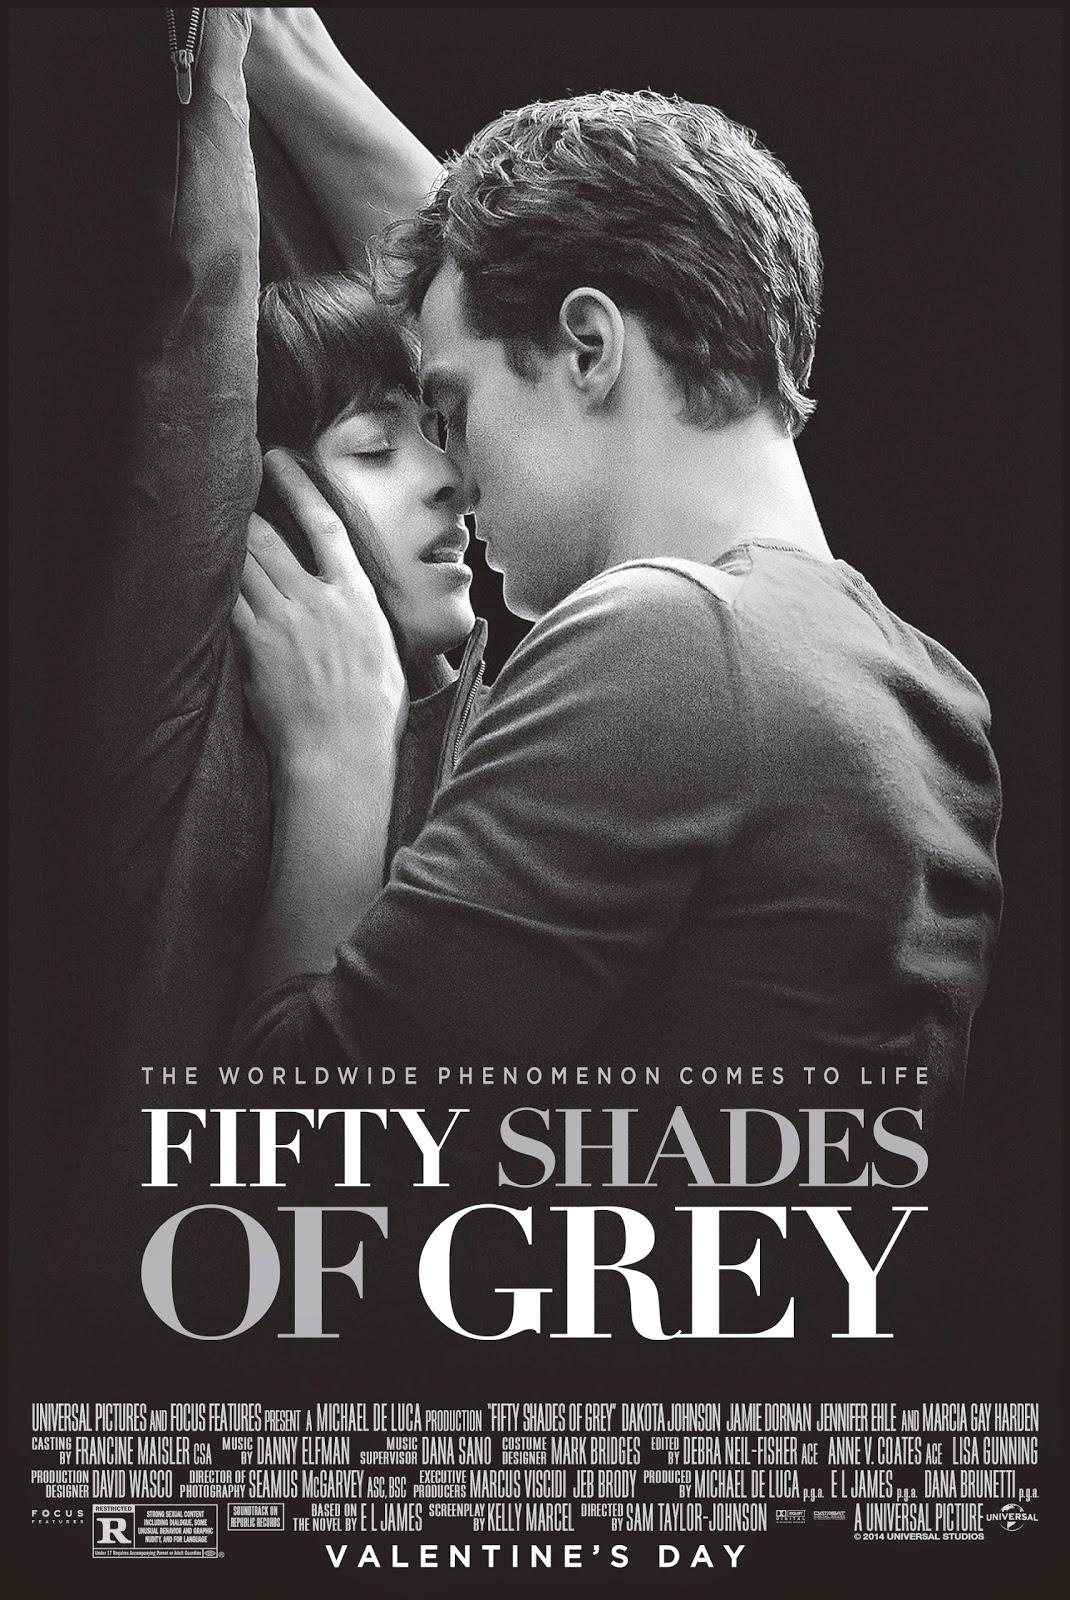 TheTwoOhSix: Fifty Shades of Grey - Movie Review